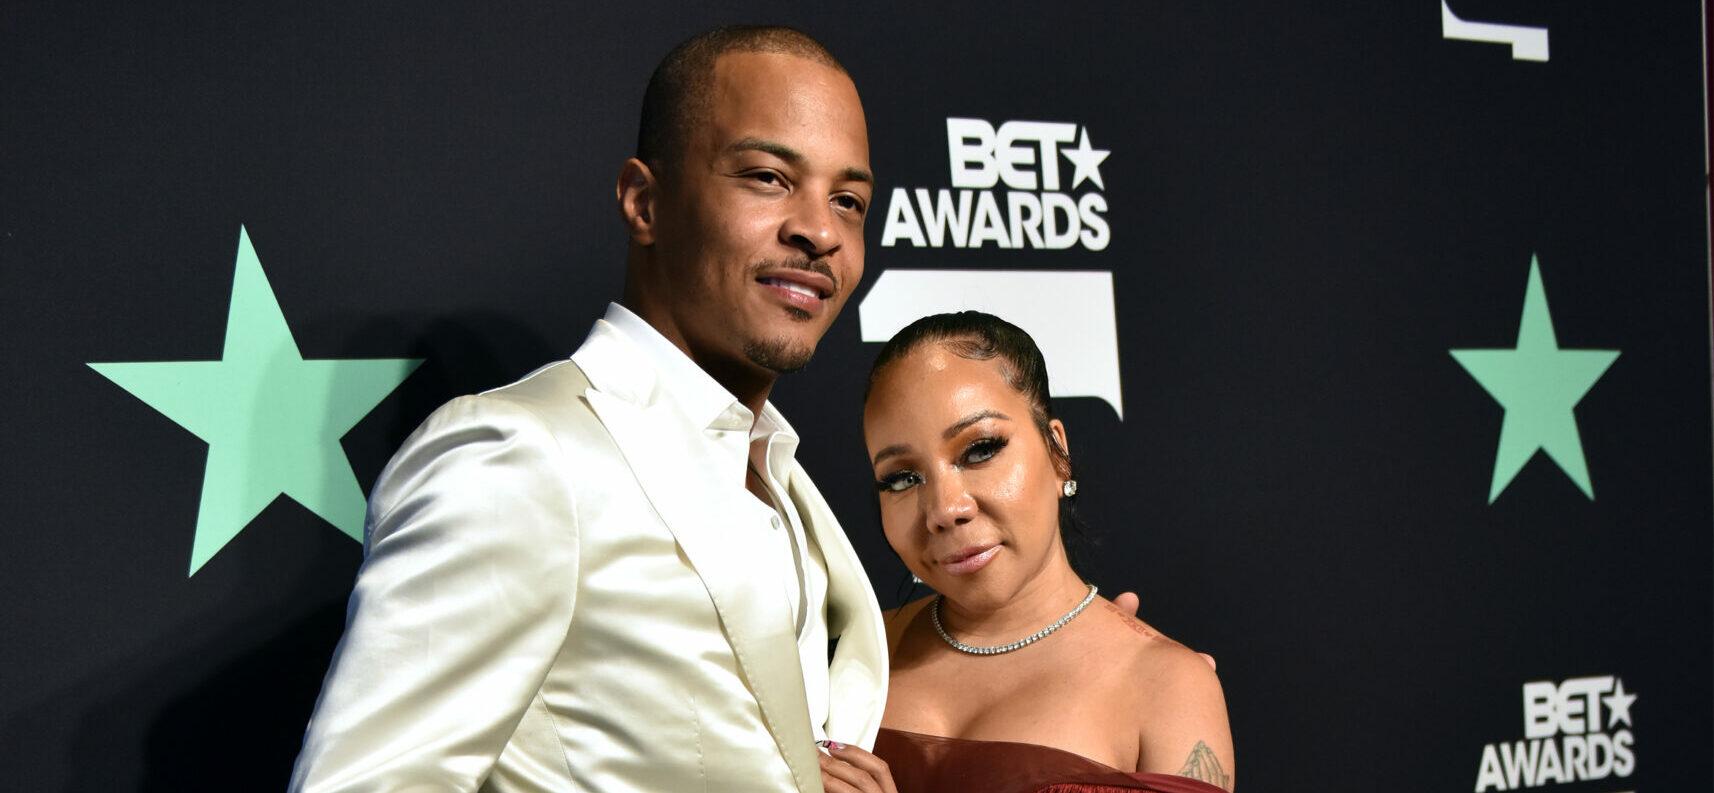 T.I. and Tameka "Tiny" Harris backstage at the BET Awards in Los Angeles